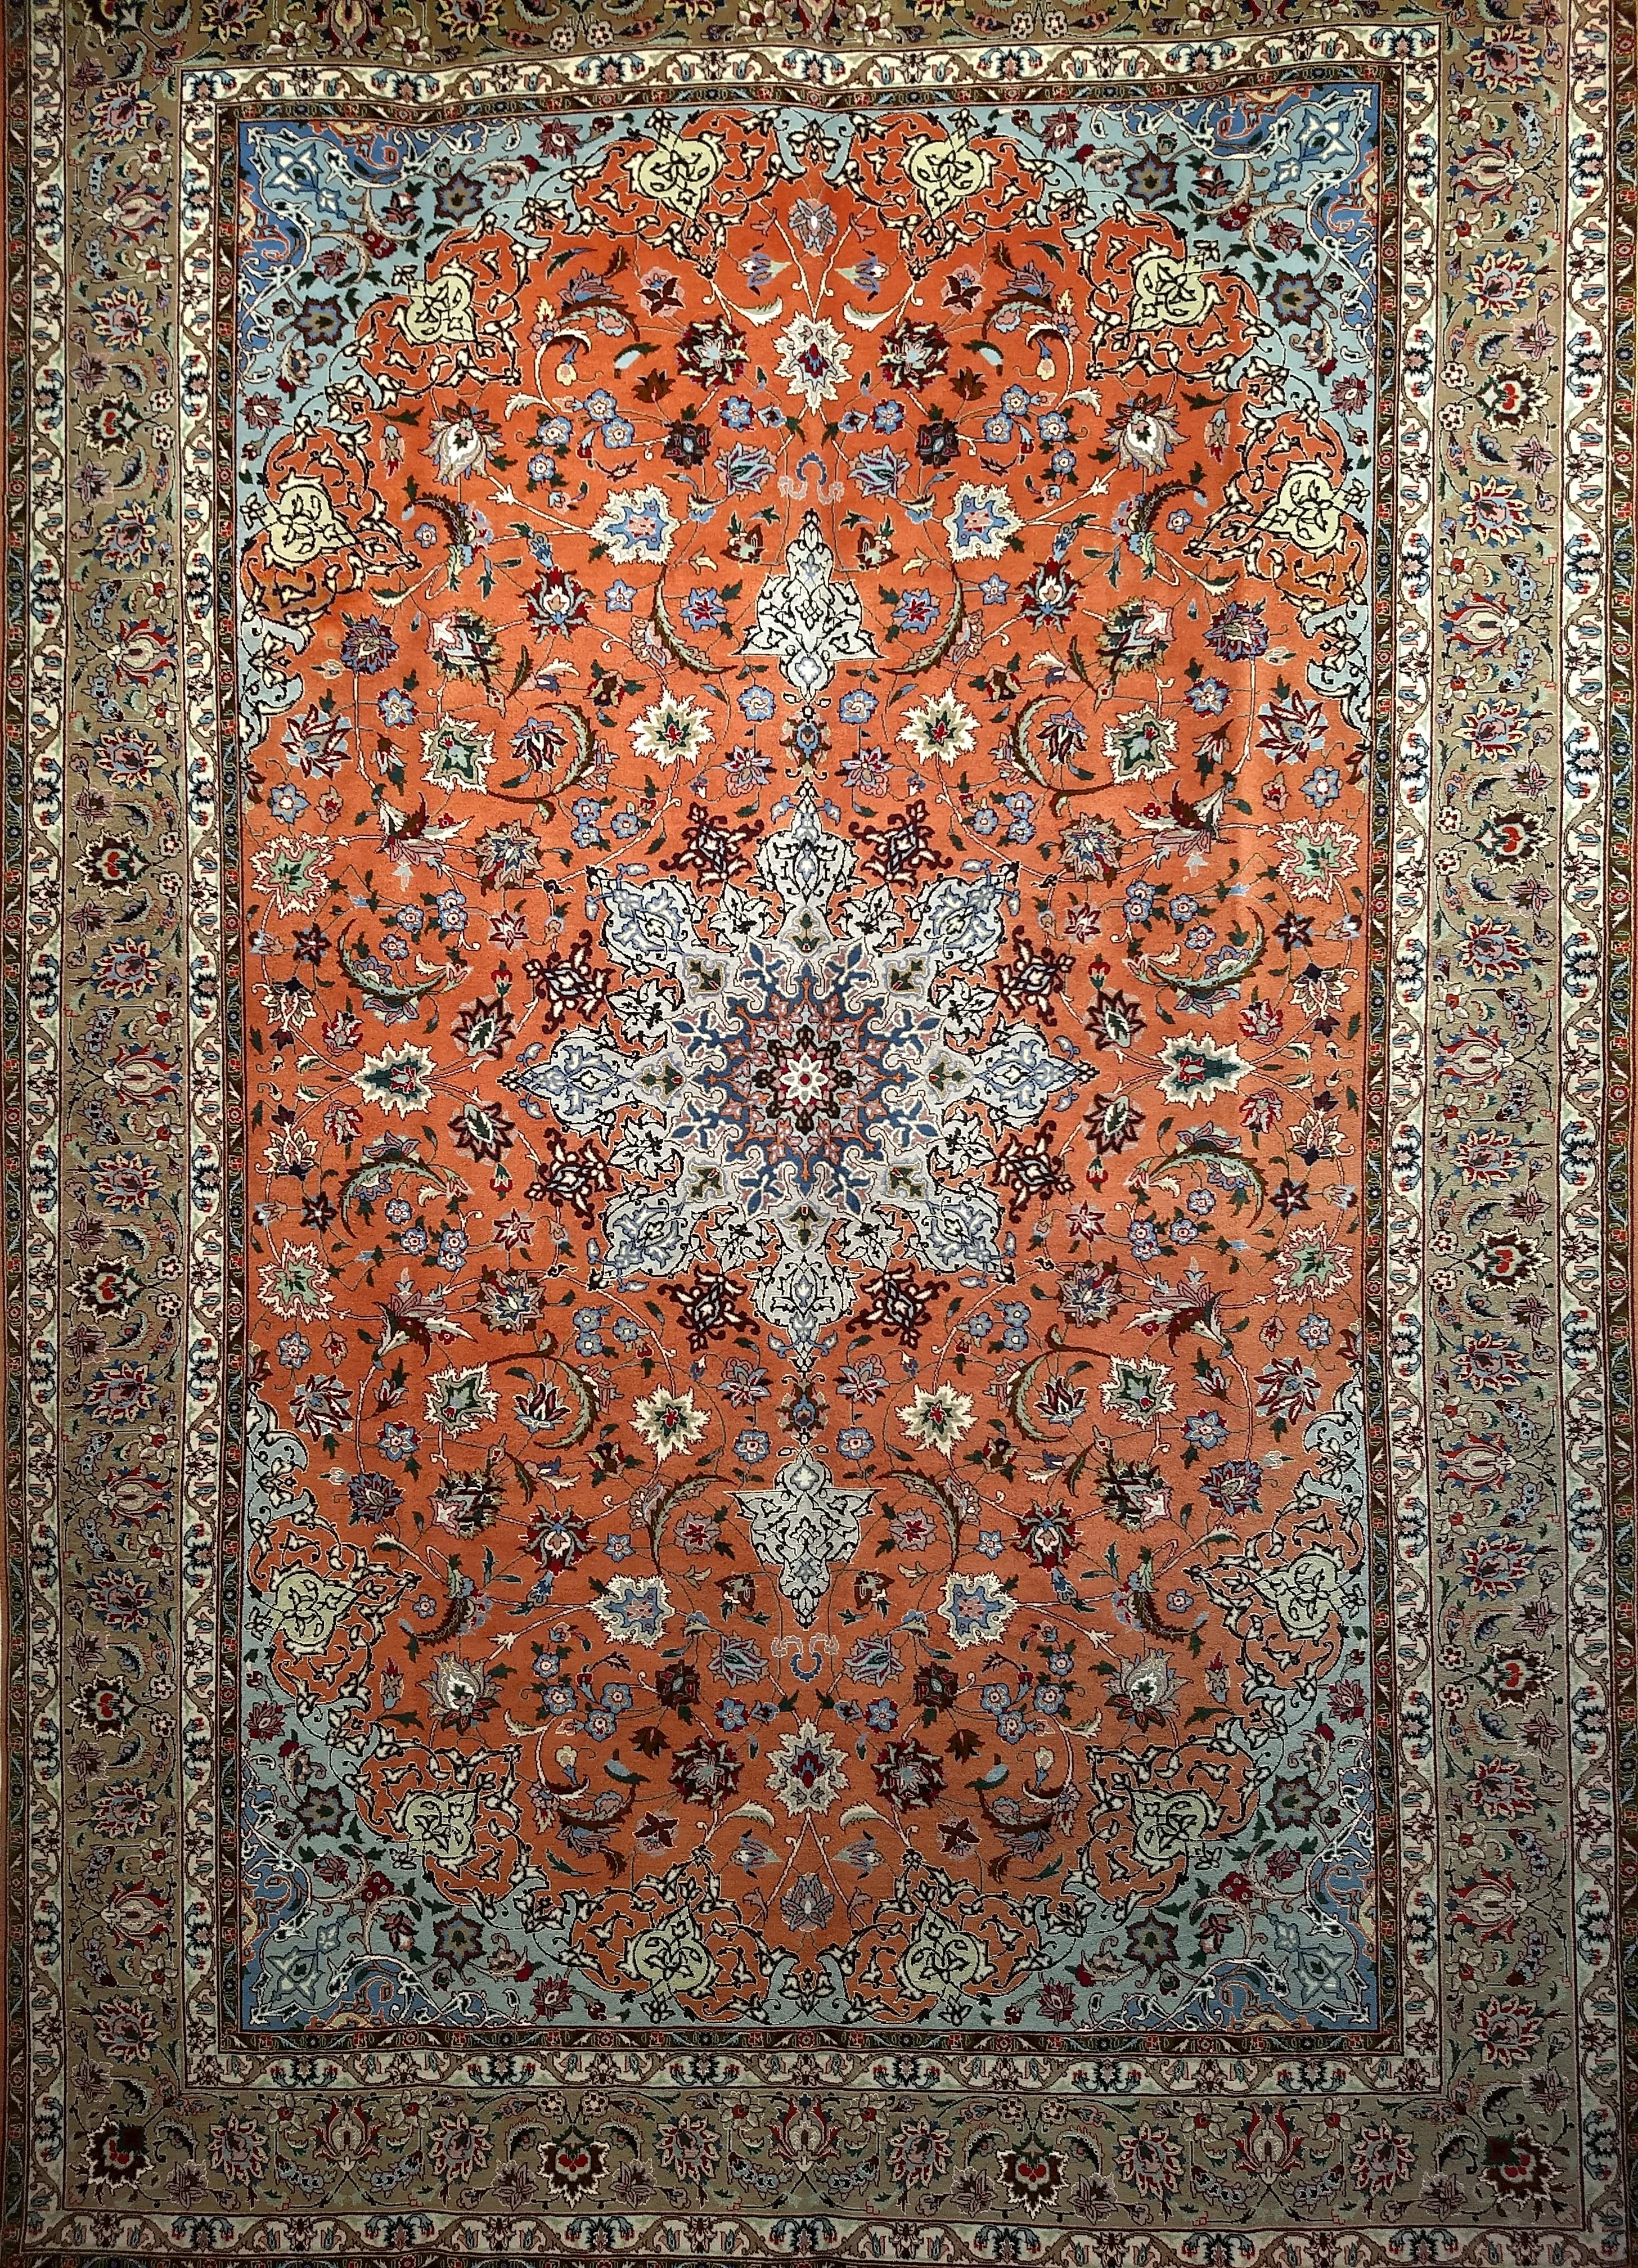 A fine Tabriz floral pattern room size rug in a rust-red field color and light brown or caramel border. The rug was woven in the 4th quarter of the 1900s but has never been used so it is considered “new”.   It was hand woven in one of the finest